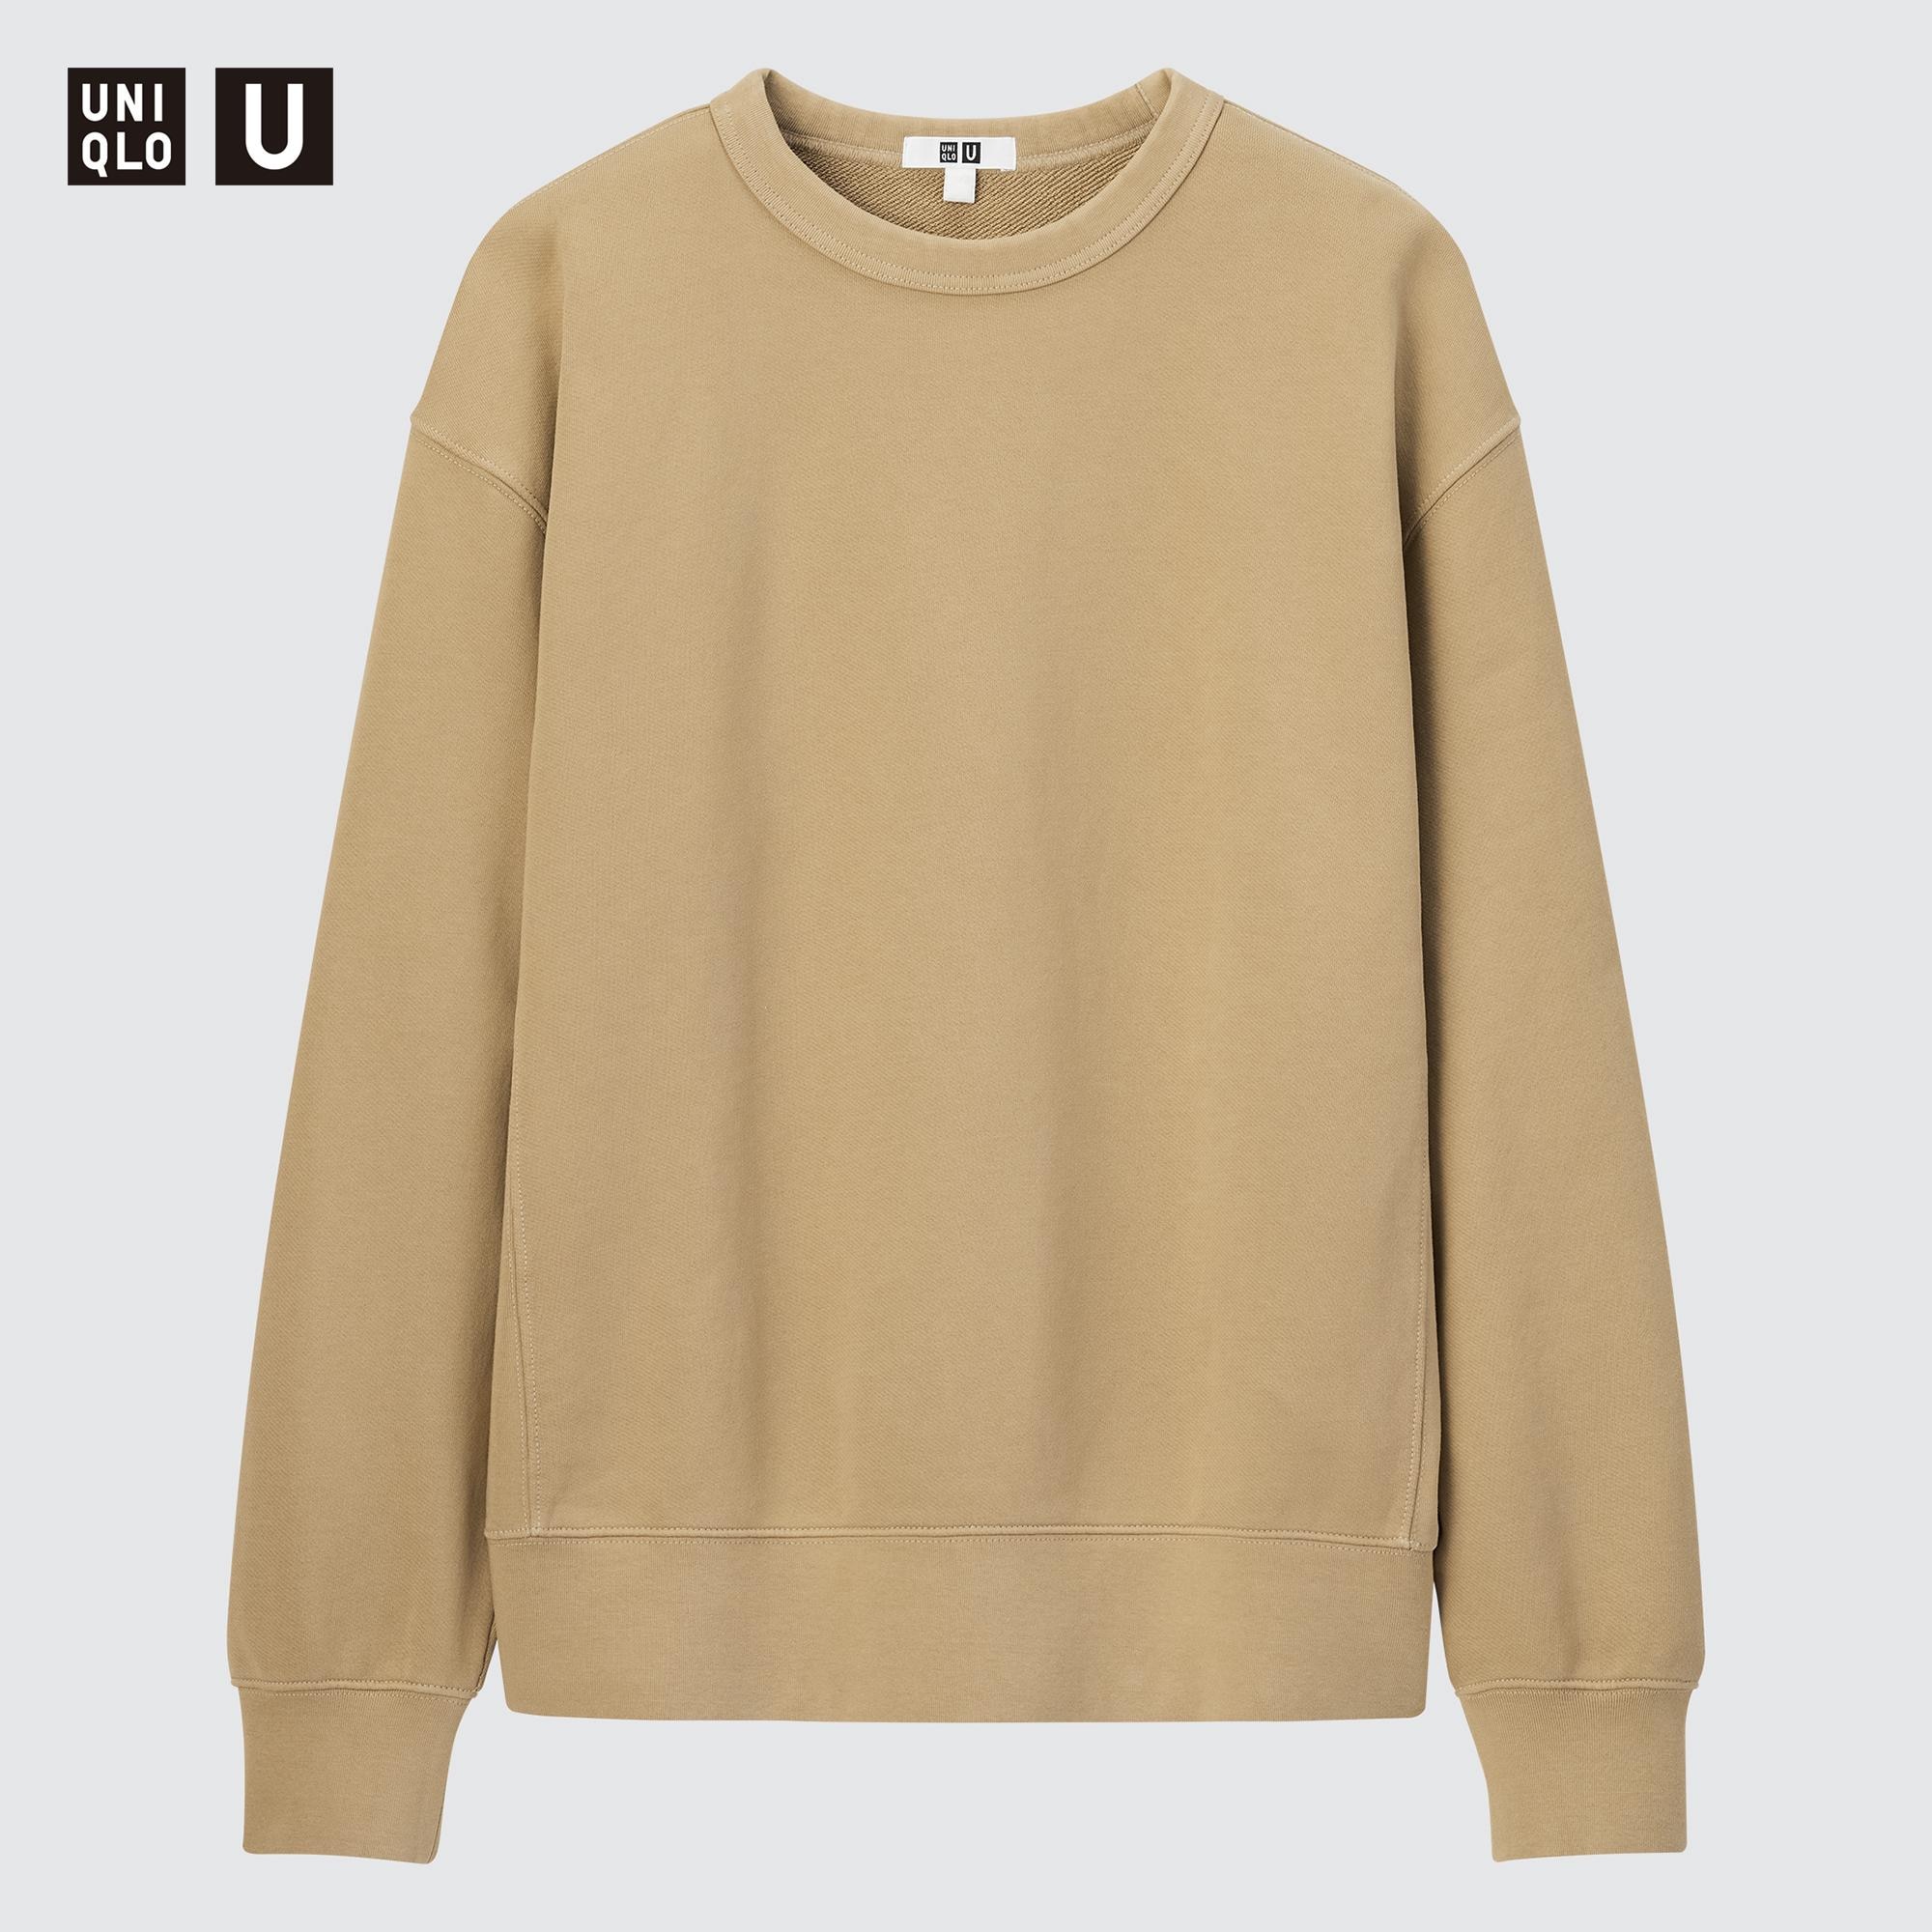 Uniqlo WomensMens Sweaters  Low Gauge Ribbed Crew Neck LongSleeve Sweater  OLIVE  Moticommodity